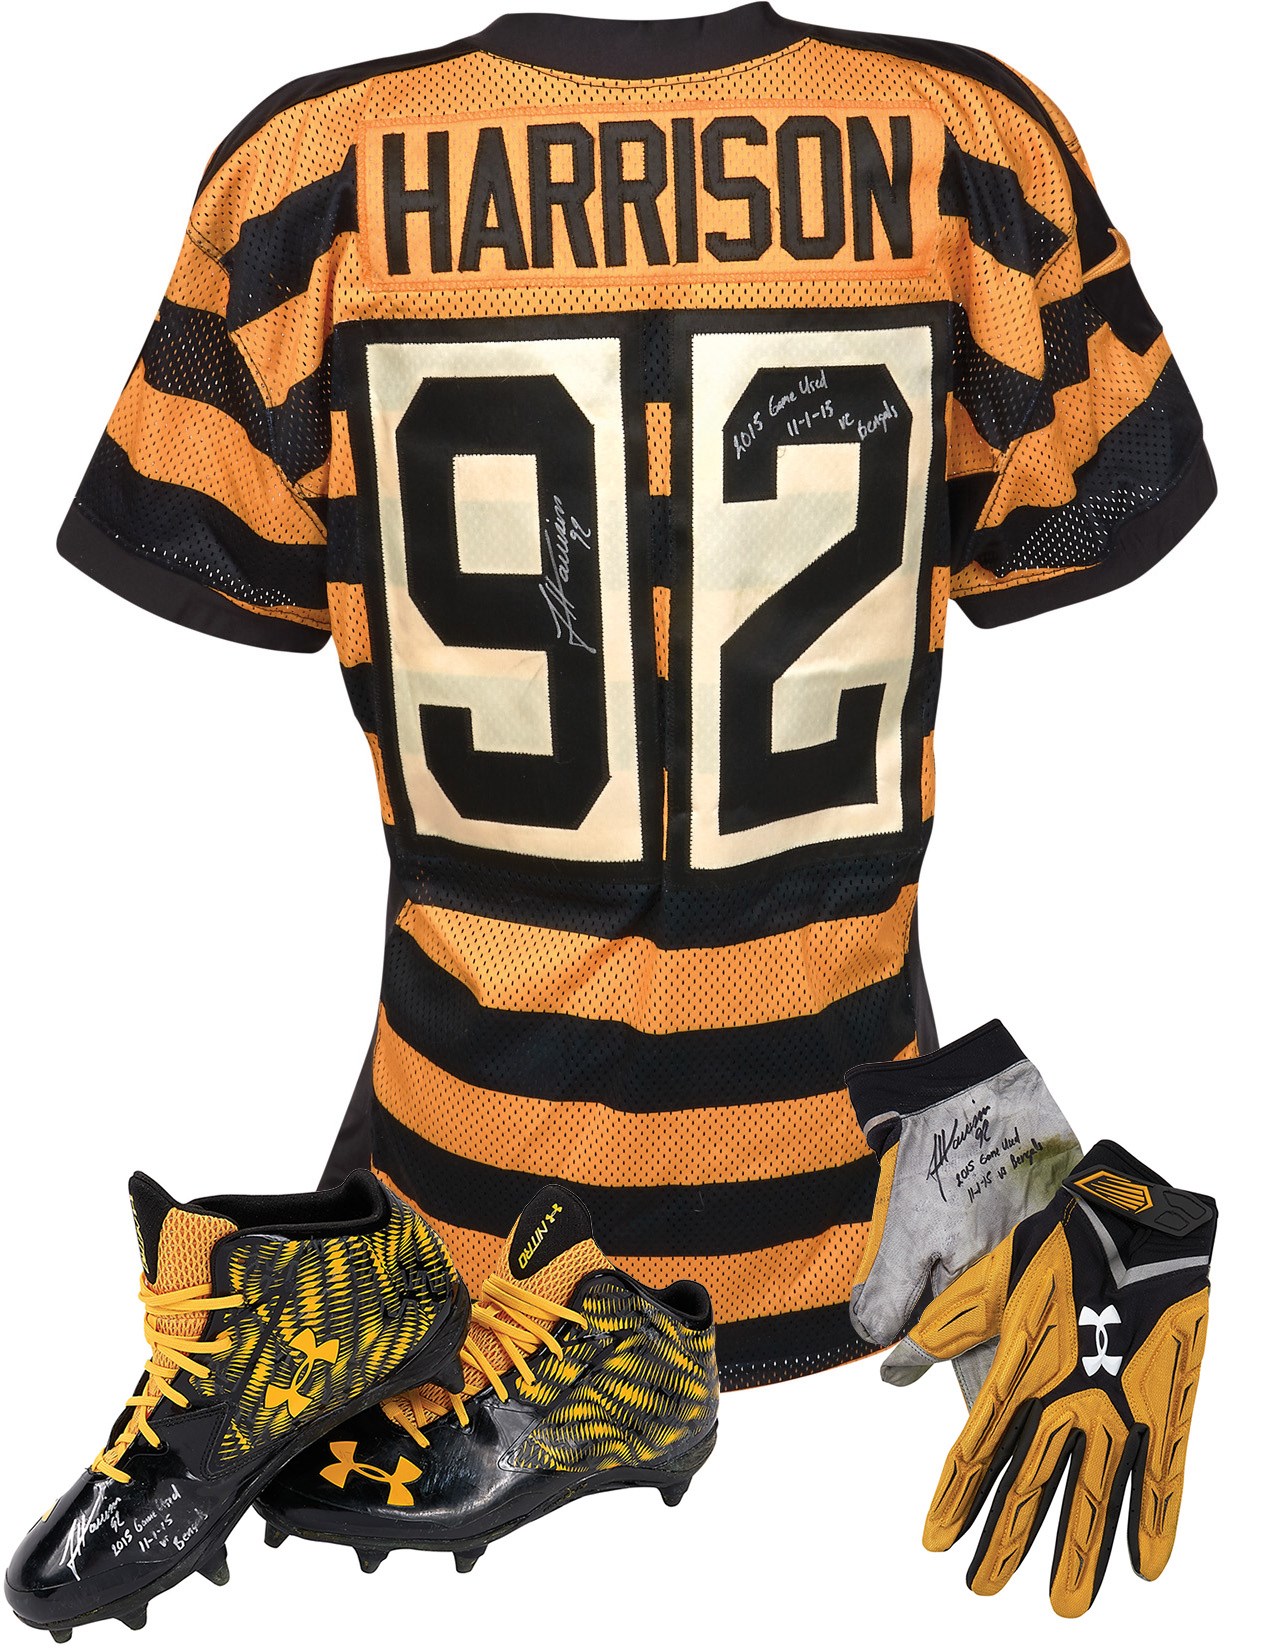 Football - 2015 James Harrison Pittsburgh Steelers Game Worn "Bumble Bee" Style Jersey with Cleats and Gloves from Harrison (Photo-Matched)